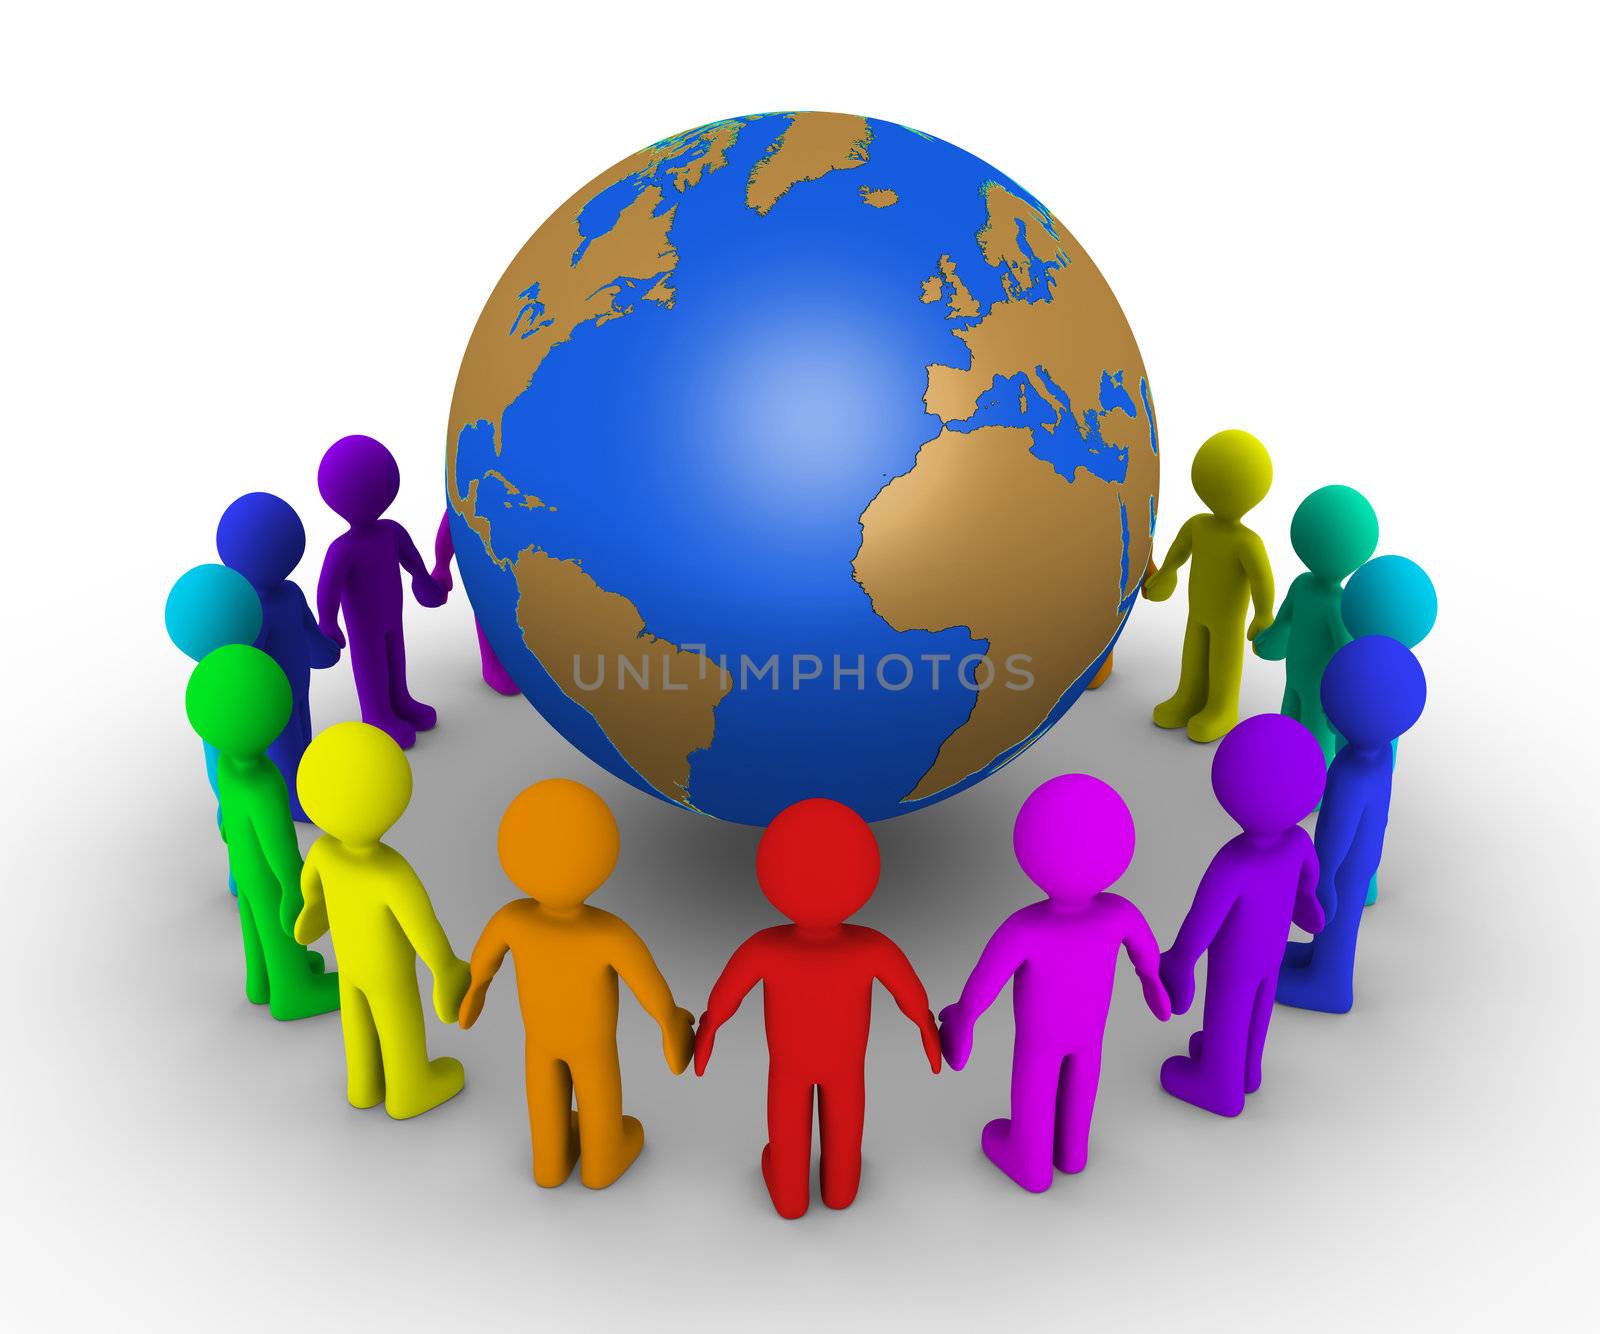 Different colored people form a circle around the globe